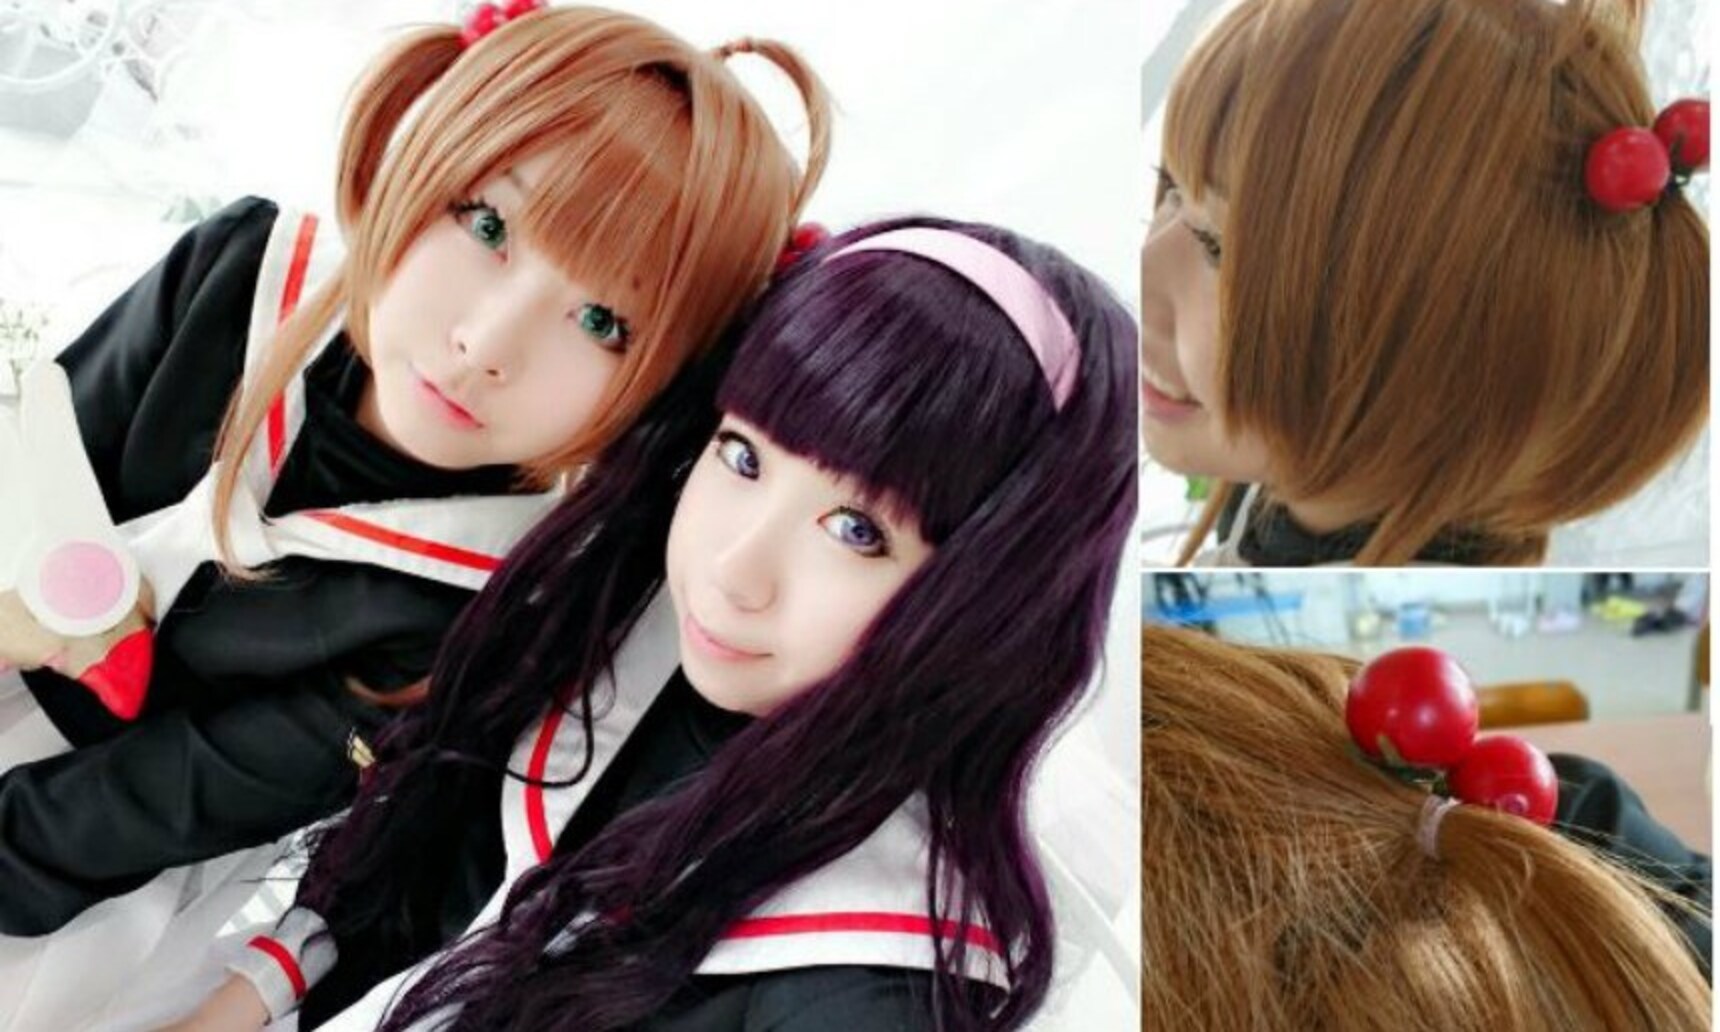 8 Cosplayers Improvise Missing Costume Parts